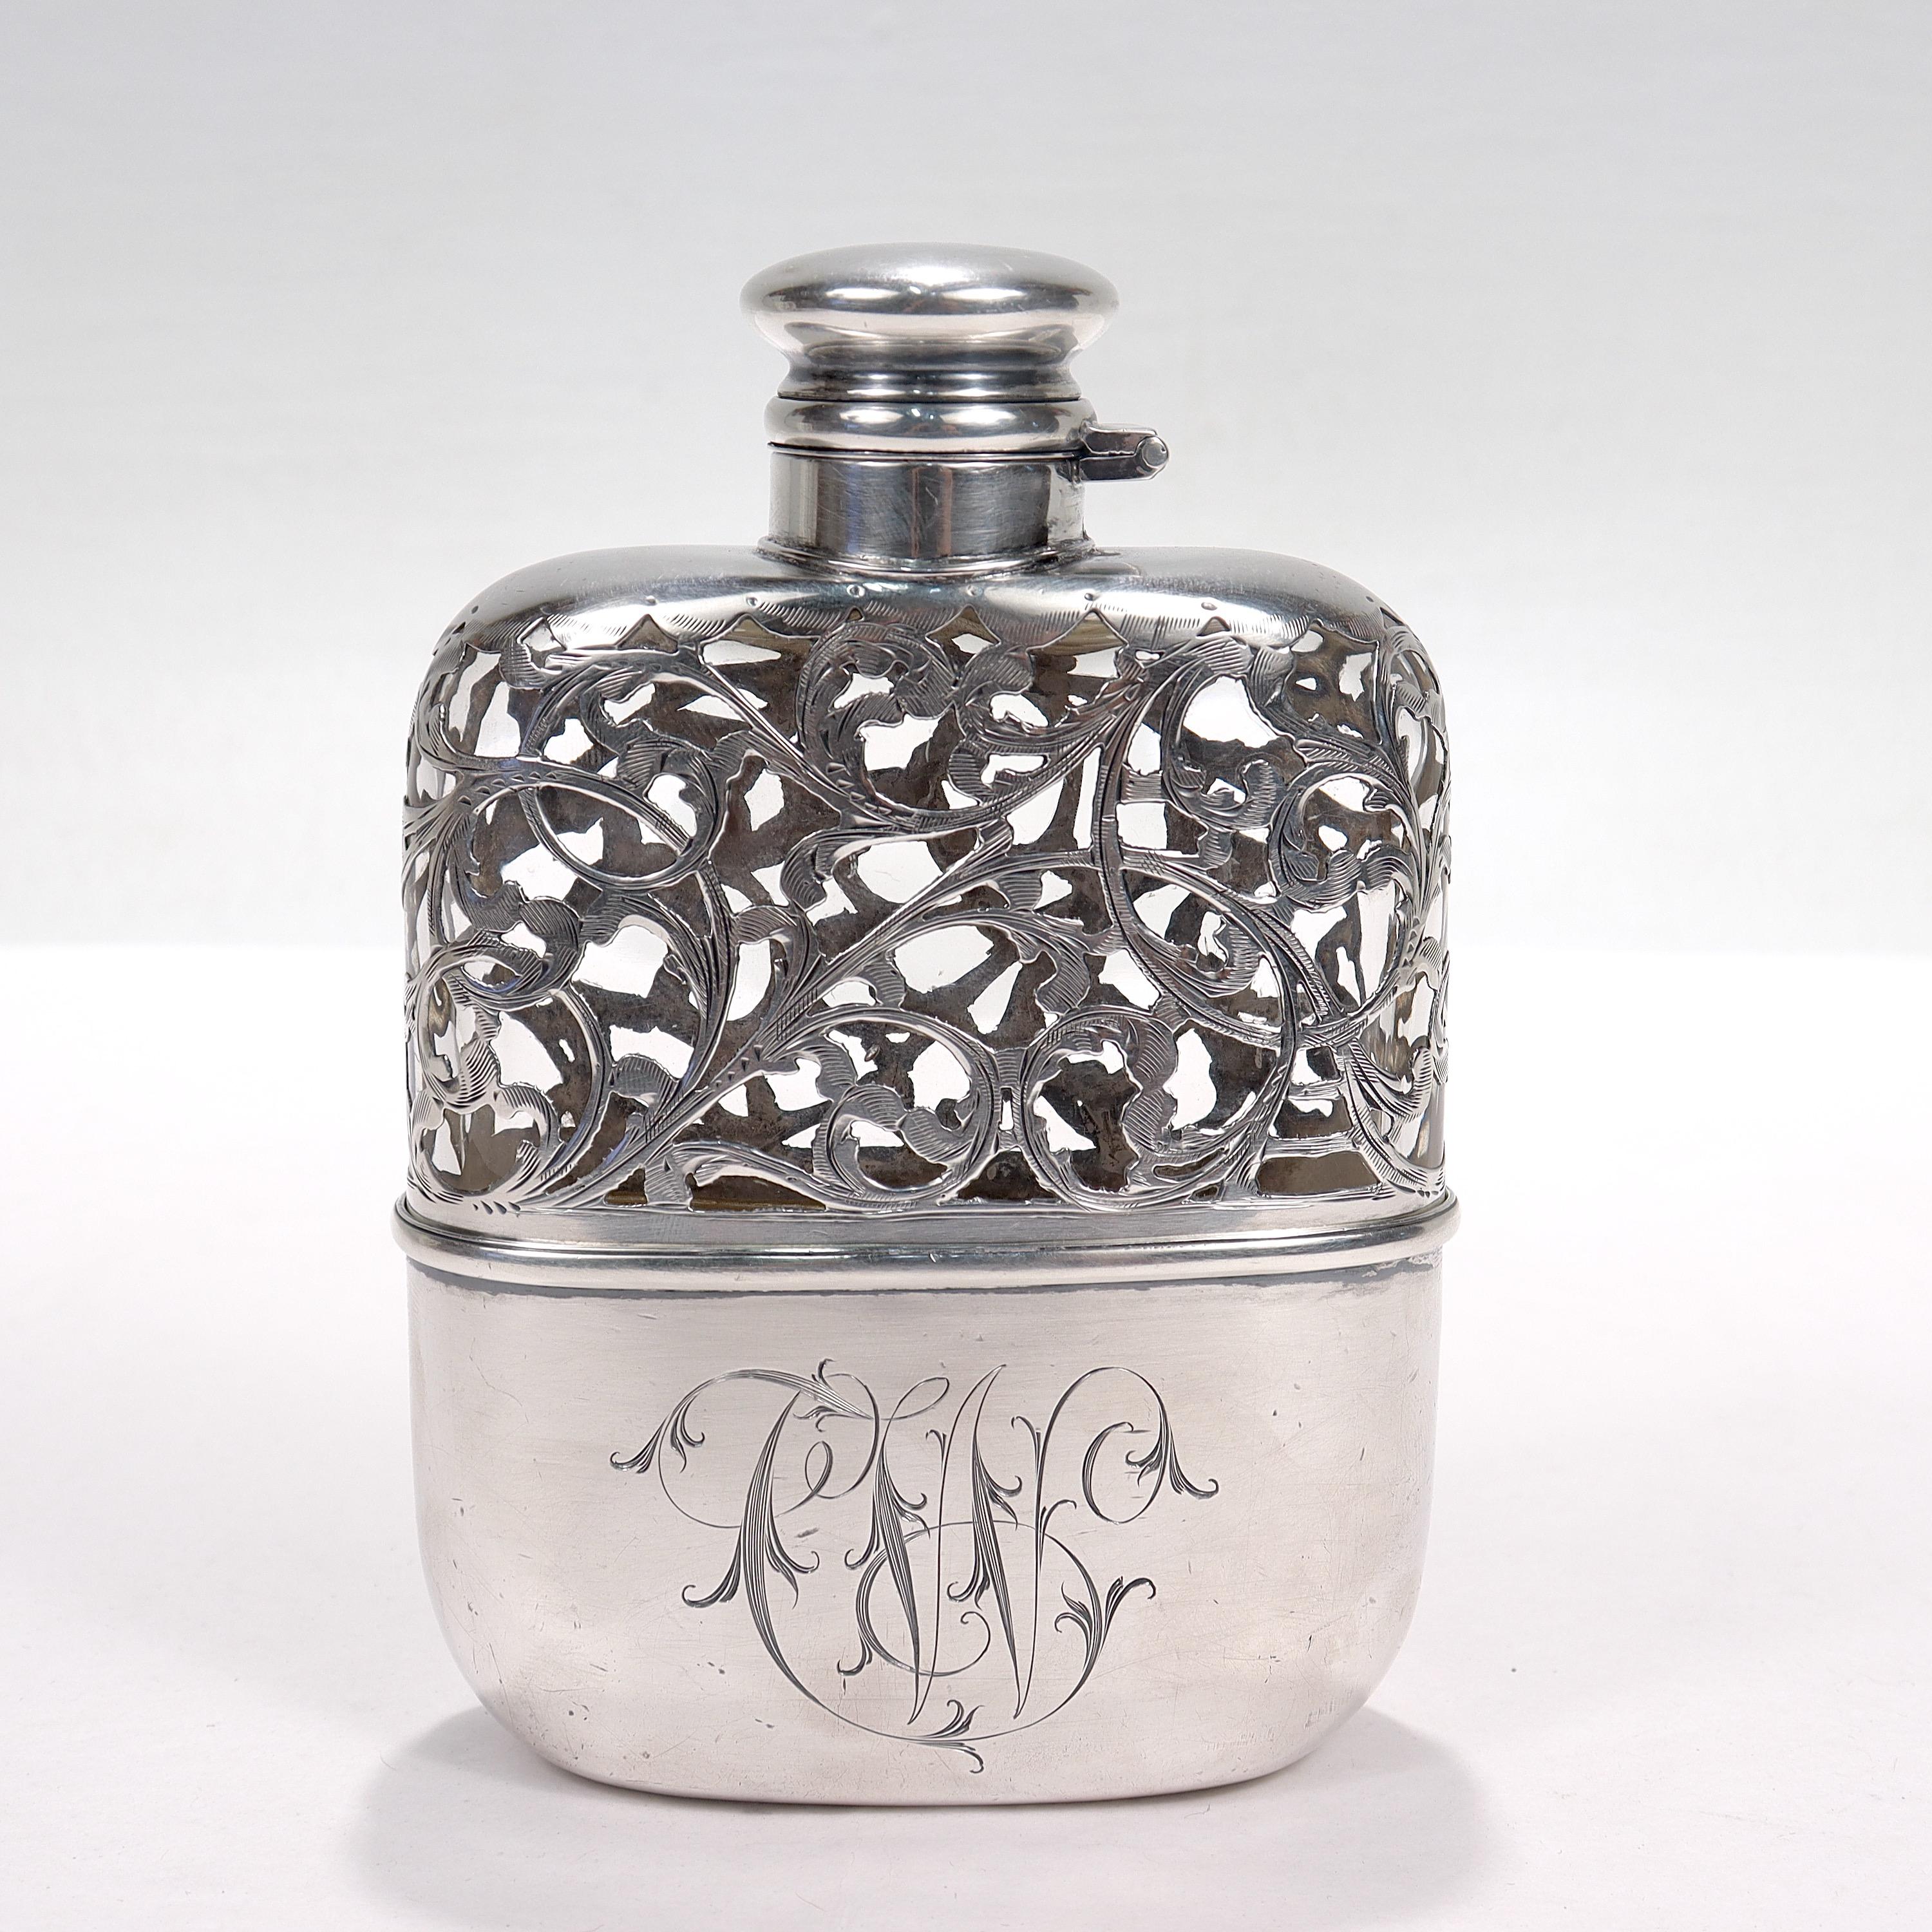 A fine antique hip flask.

In sterling silver and glass with a silver overlay top, a hinged, twist-top lid, and a removable cup to the base. 

Monogrammed with a cursive 